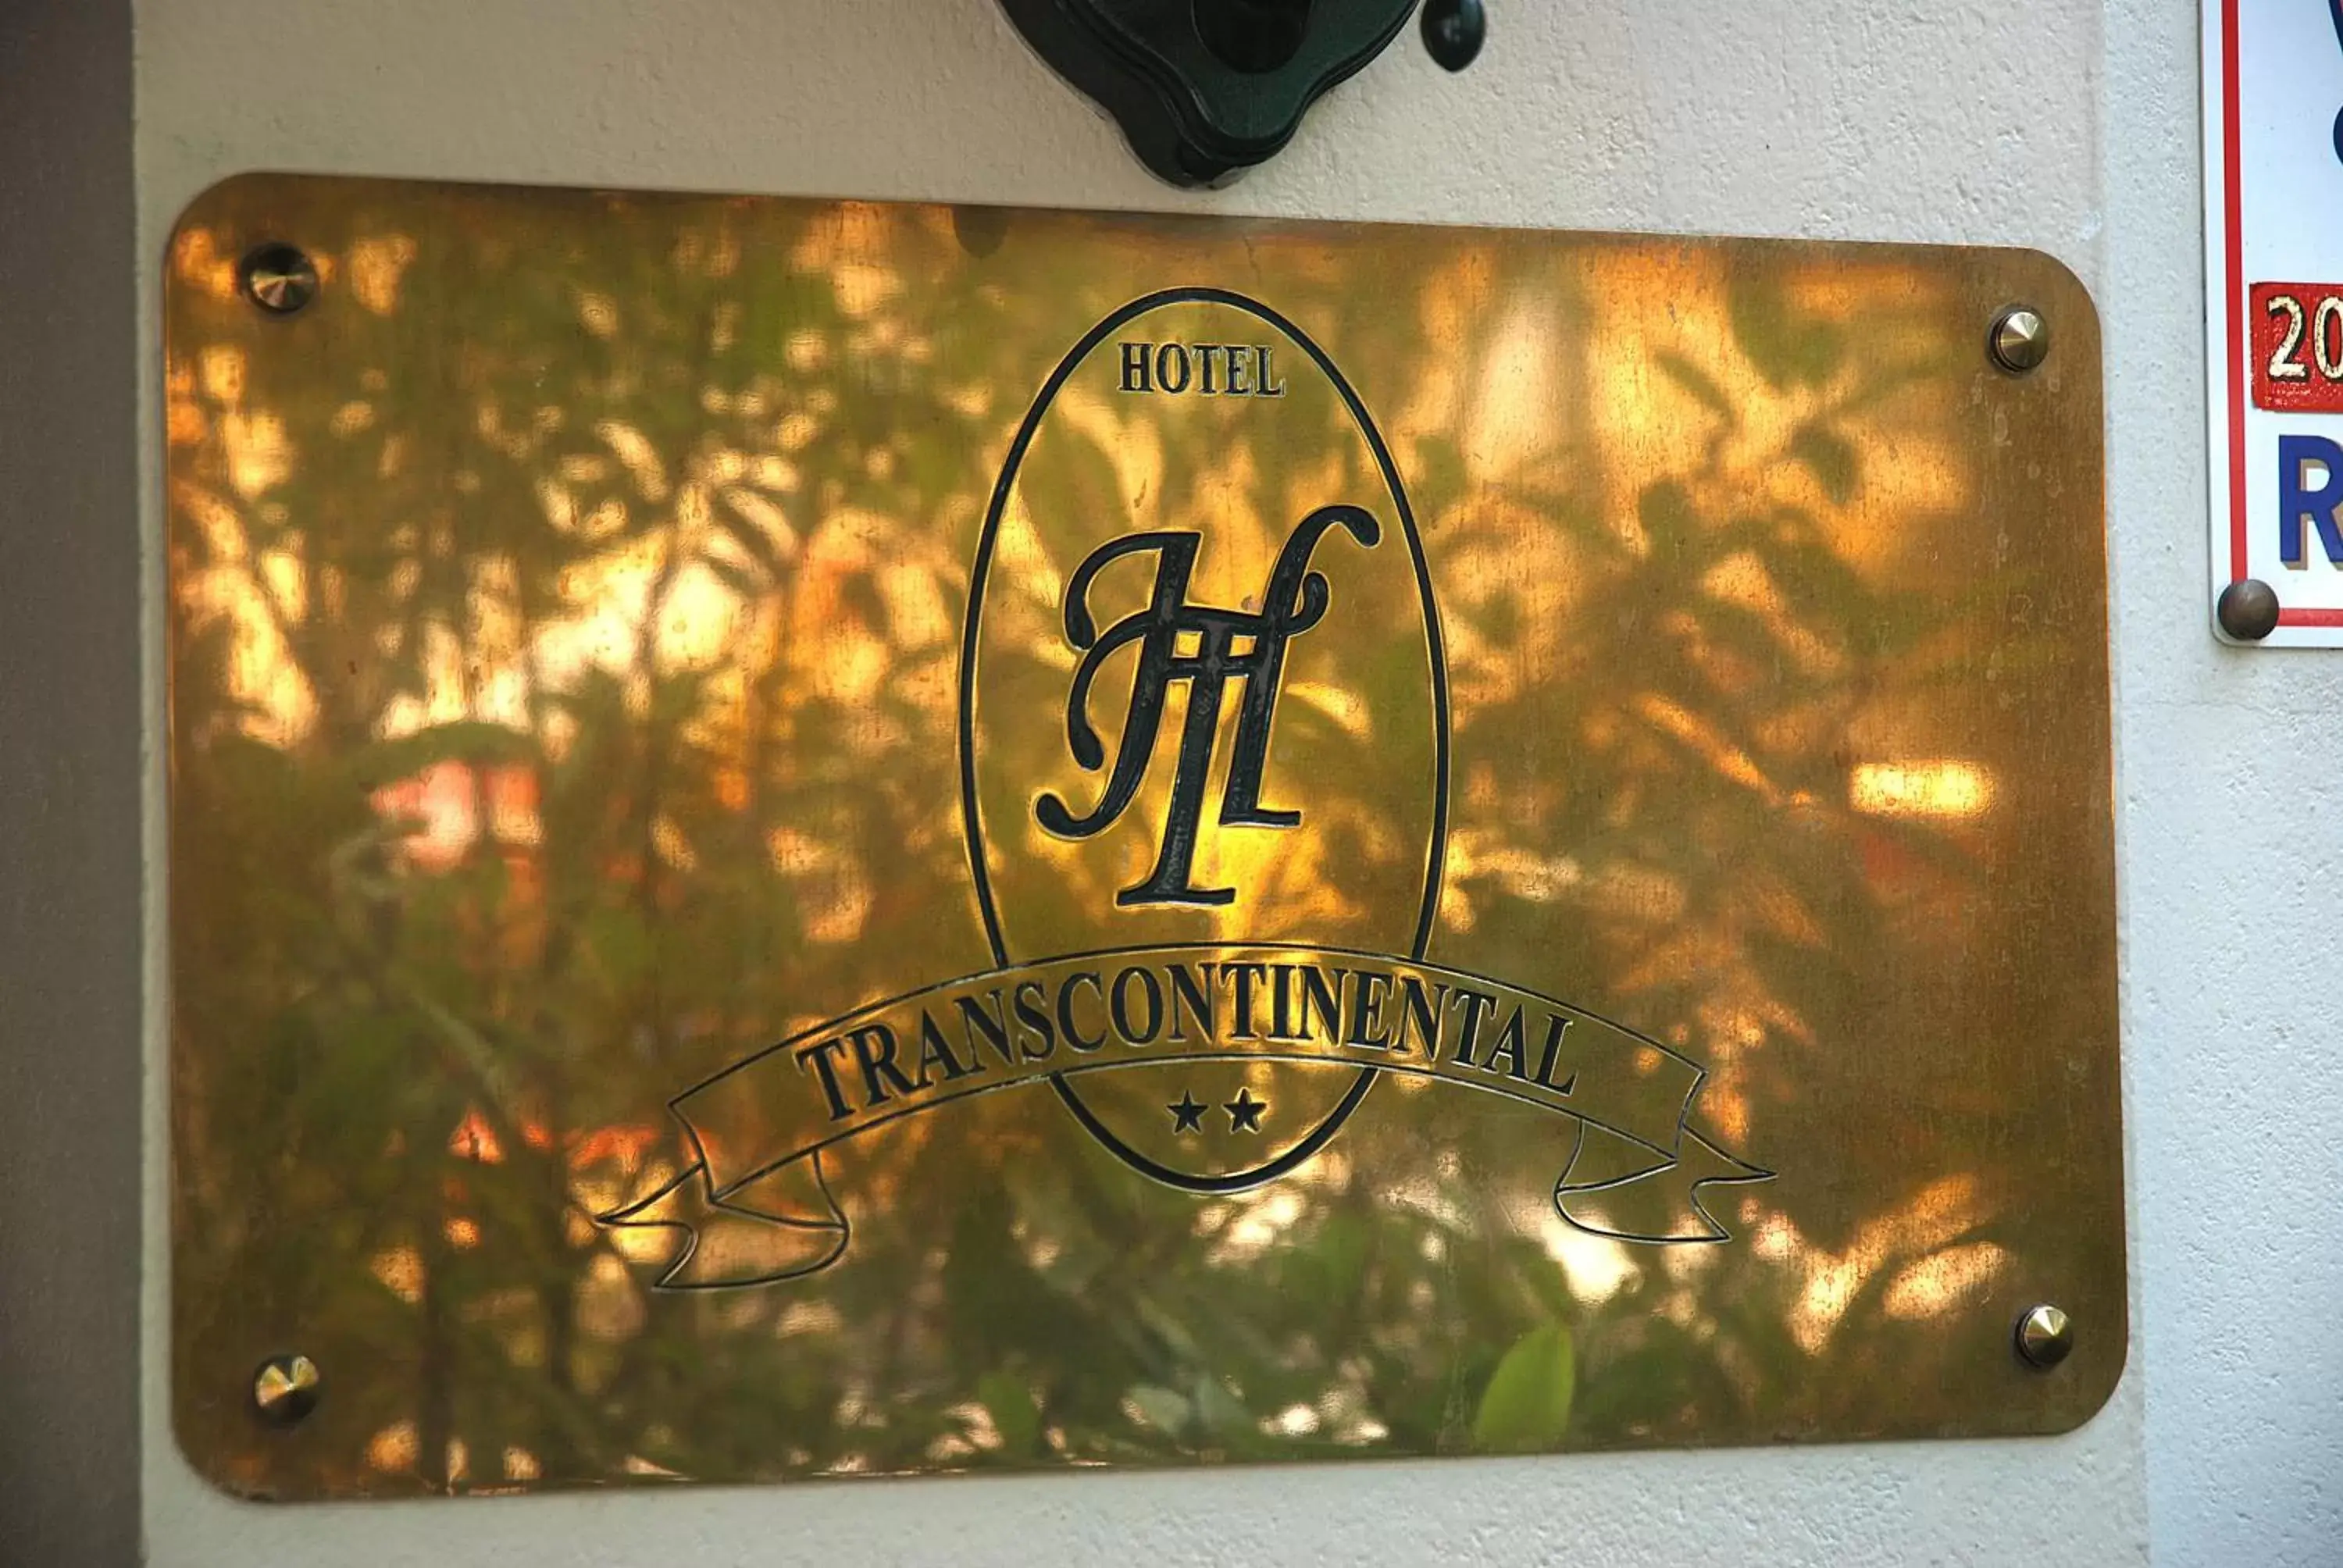 Property logo or sign, Property Logo/Sign in Hotel Transcontinental